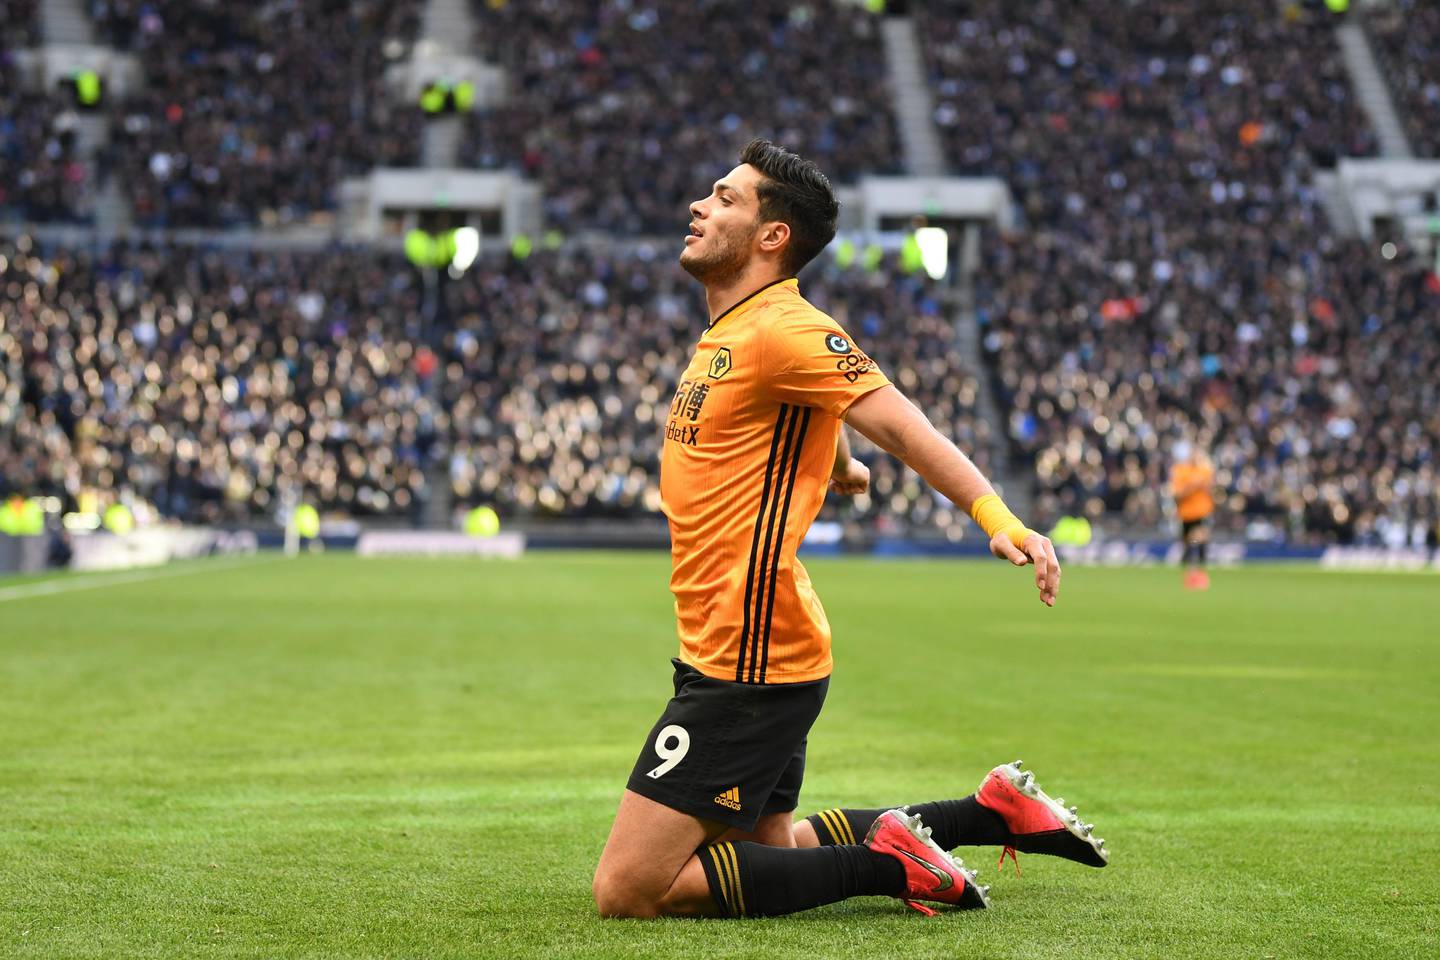 Wolverhampton Wanderers' Mexican striker Raul Jimenez celebrates after scoring their third goal during the English Premier League football match between Tottenham Hotspur and Wolverhampton Wanderers at the Tottenham Hotspur Stadium in London, on March 1, 2020. (Photo by DANIEL LEAL-OLIVAS / AFP) / RESTRICTED TO EDITORIAL USE. No use with unauthorized audio, video, data, fixture lists, club/league logos or 'live' services. Online in-match use limited to 120 images. An additional 40 images may be used in extra time. No video emulation. Social media in-match use limited to 120 images. An additional 40 images may be used in extra time. No use in betting publications, games or single club/league/player publications. / 